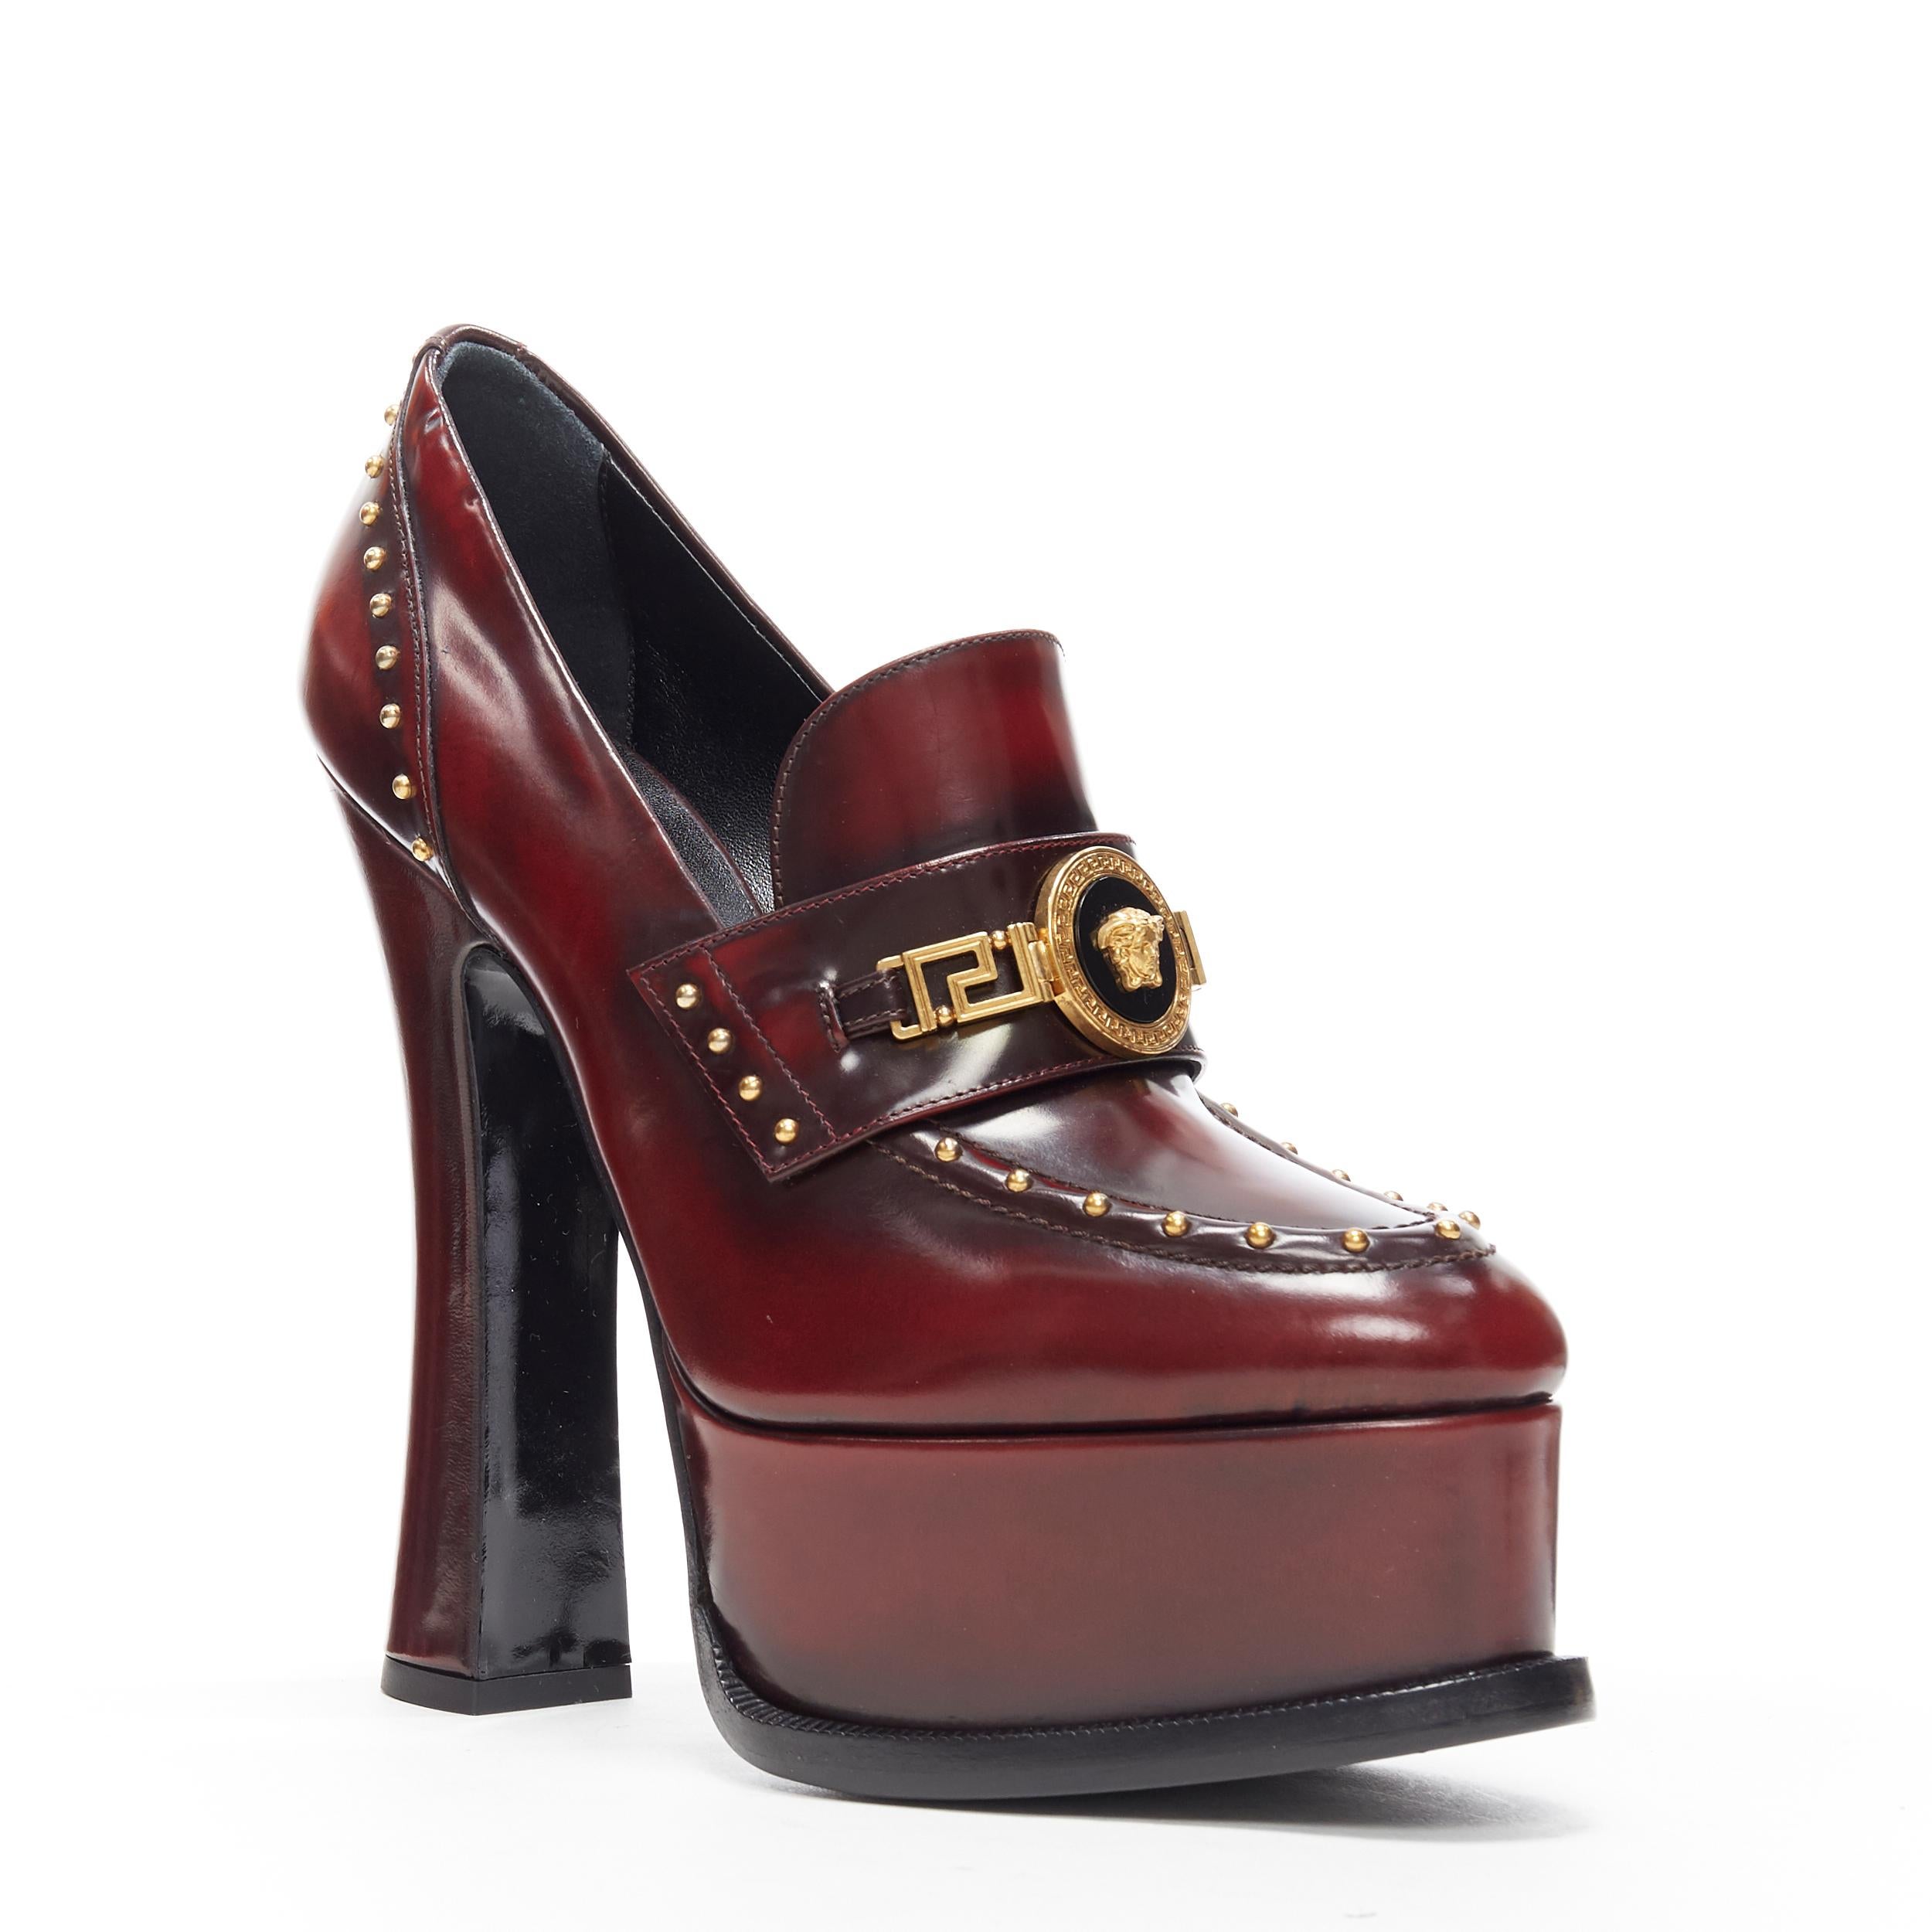 new VERSACE AW18 Runway burgundy studded Medusa chain loafer platform heel EU36
Brand: Versace
Designer: Donatella Versace
Collection: Fall Winter 2018
Model Name / Style: Loafer platforms
Material: Leather
Color: Burgundy
Pattern: Solid
Extra